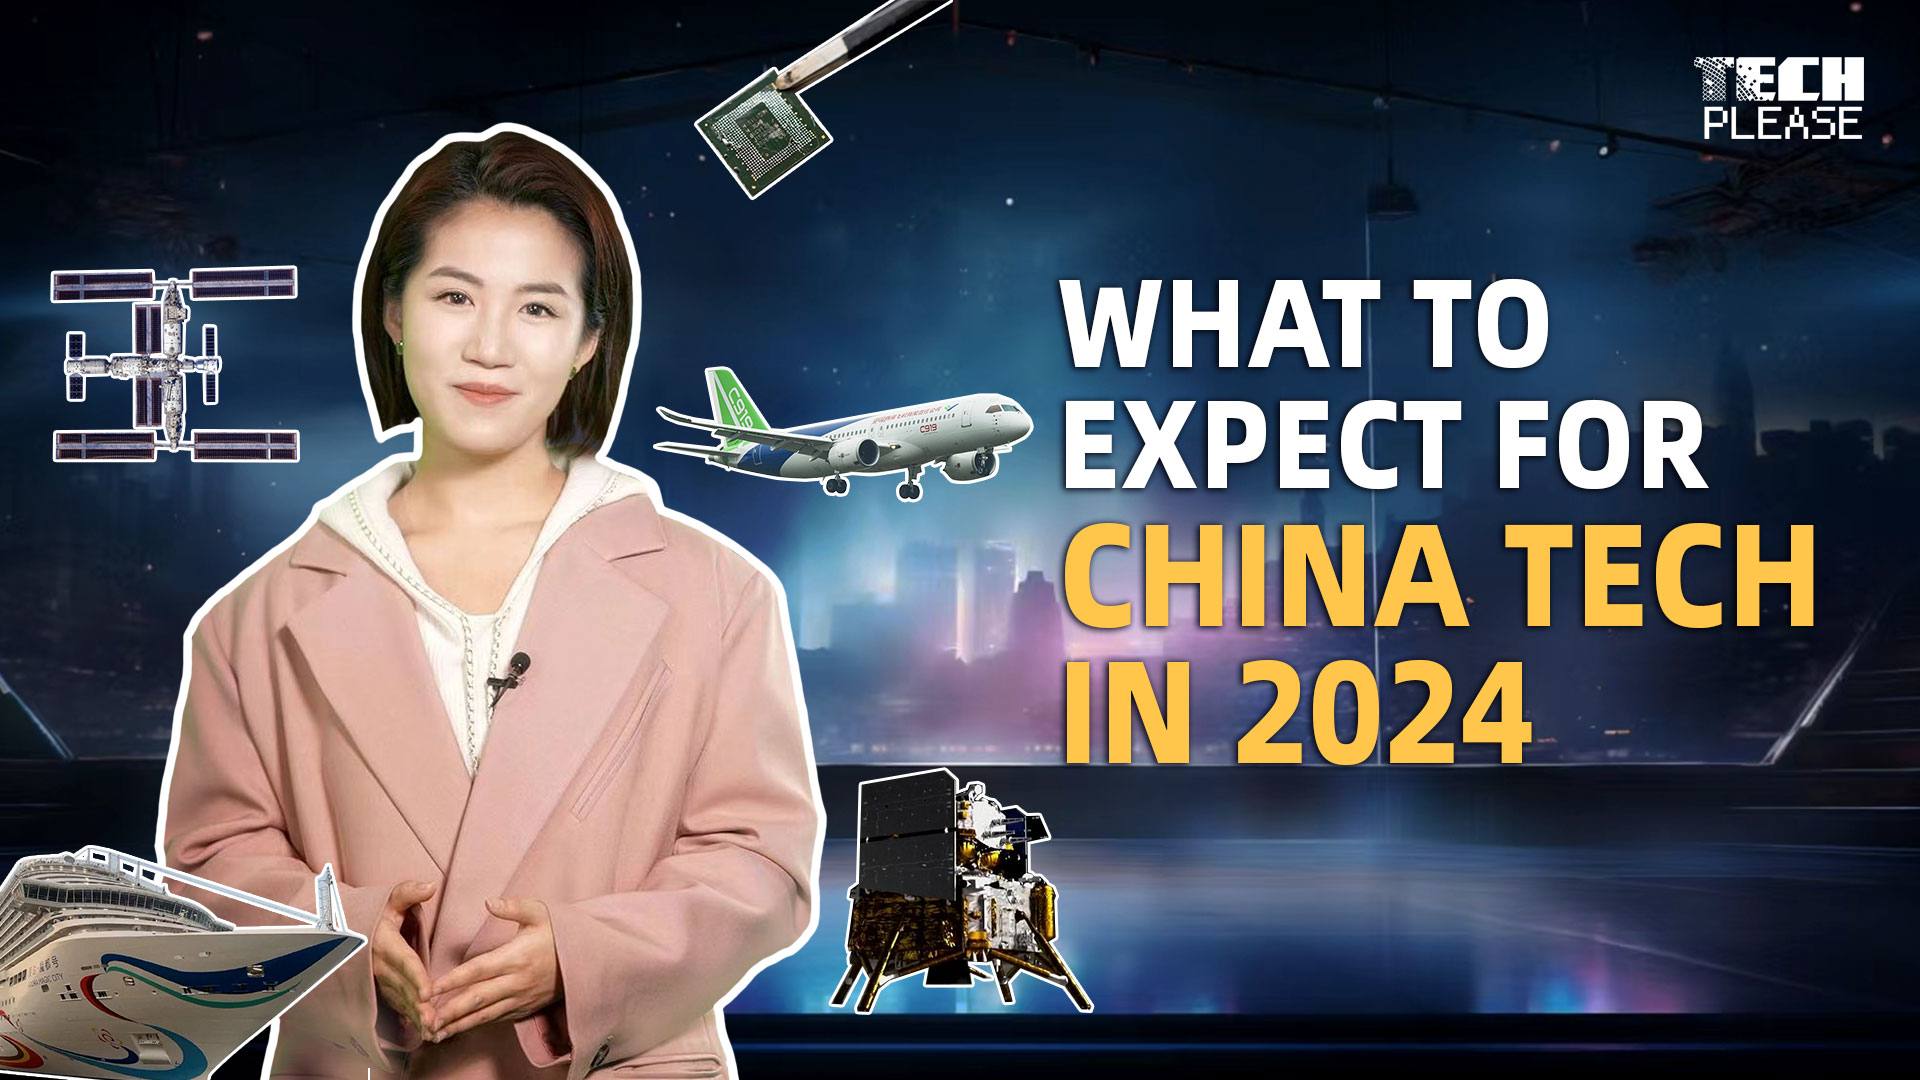 Tech Please: What to expect for China tech in 2024